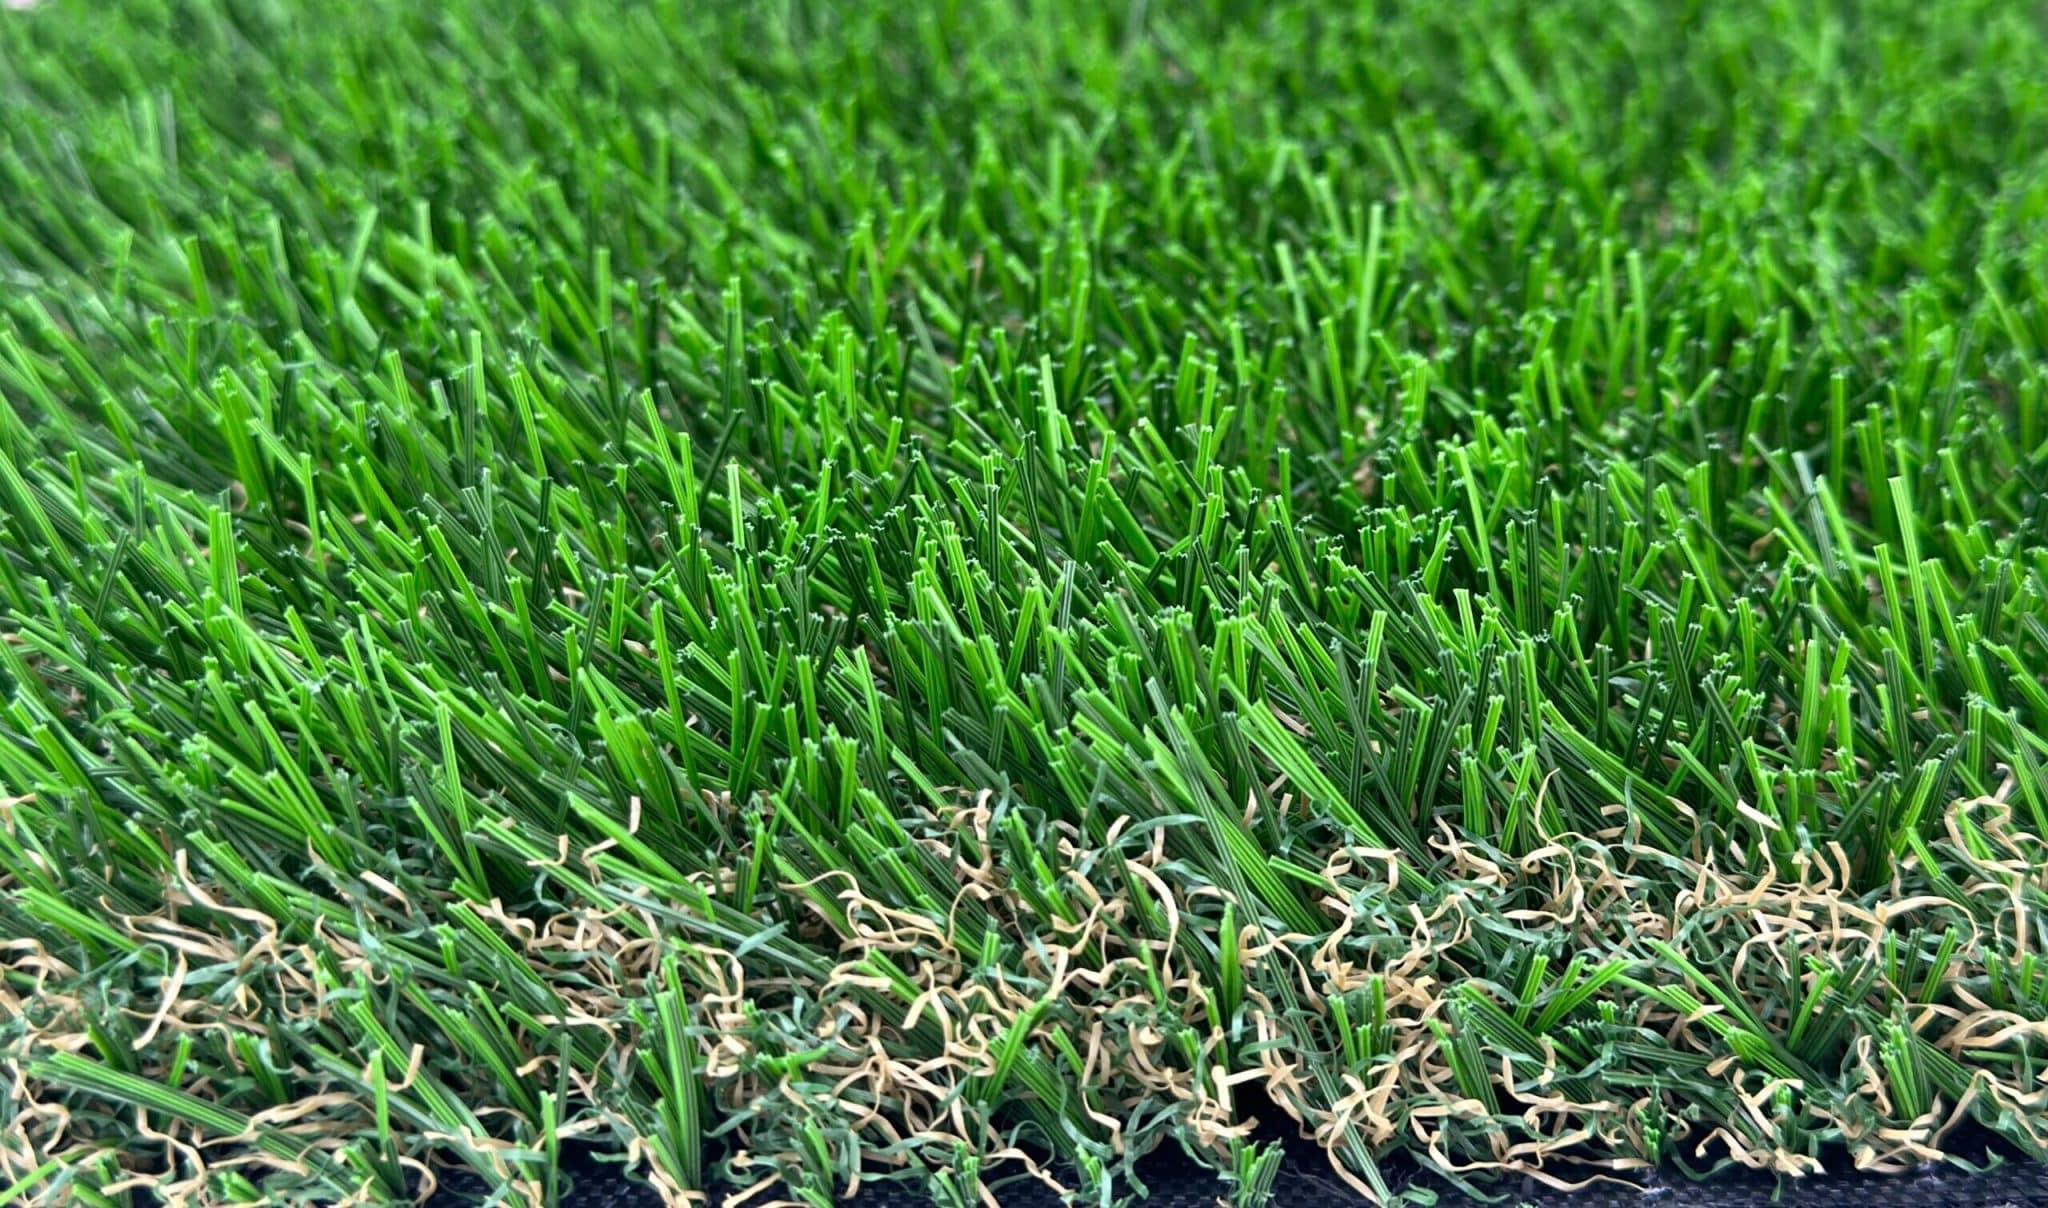 Turf in use